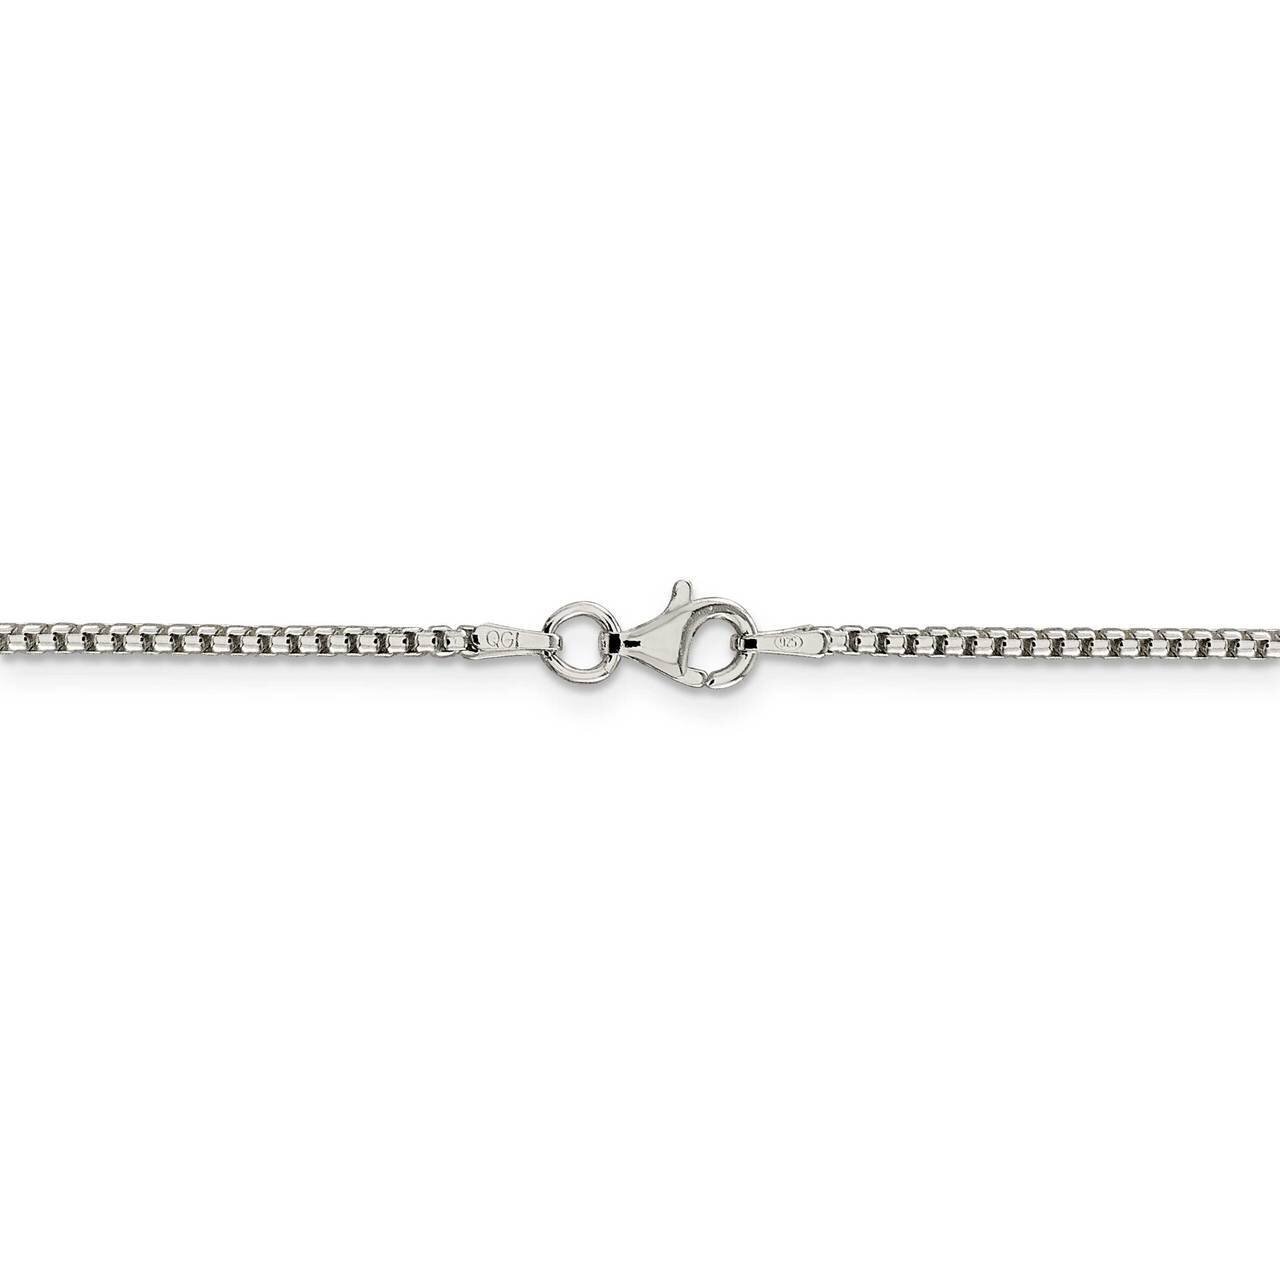 26 Inch 1.75mm Round Box Chain Sterling Silver QHX035-26